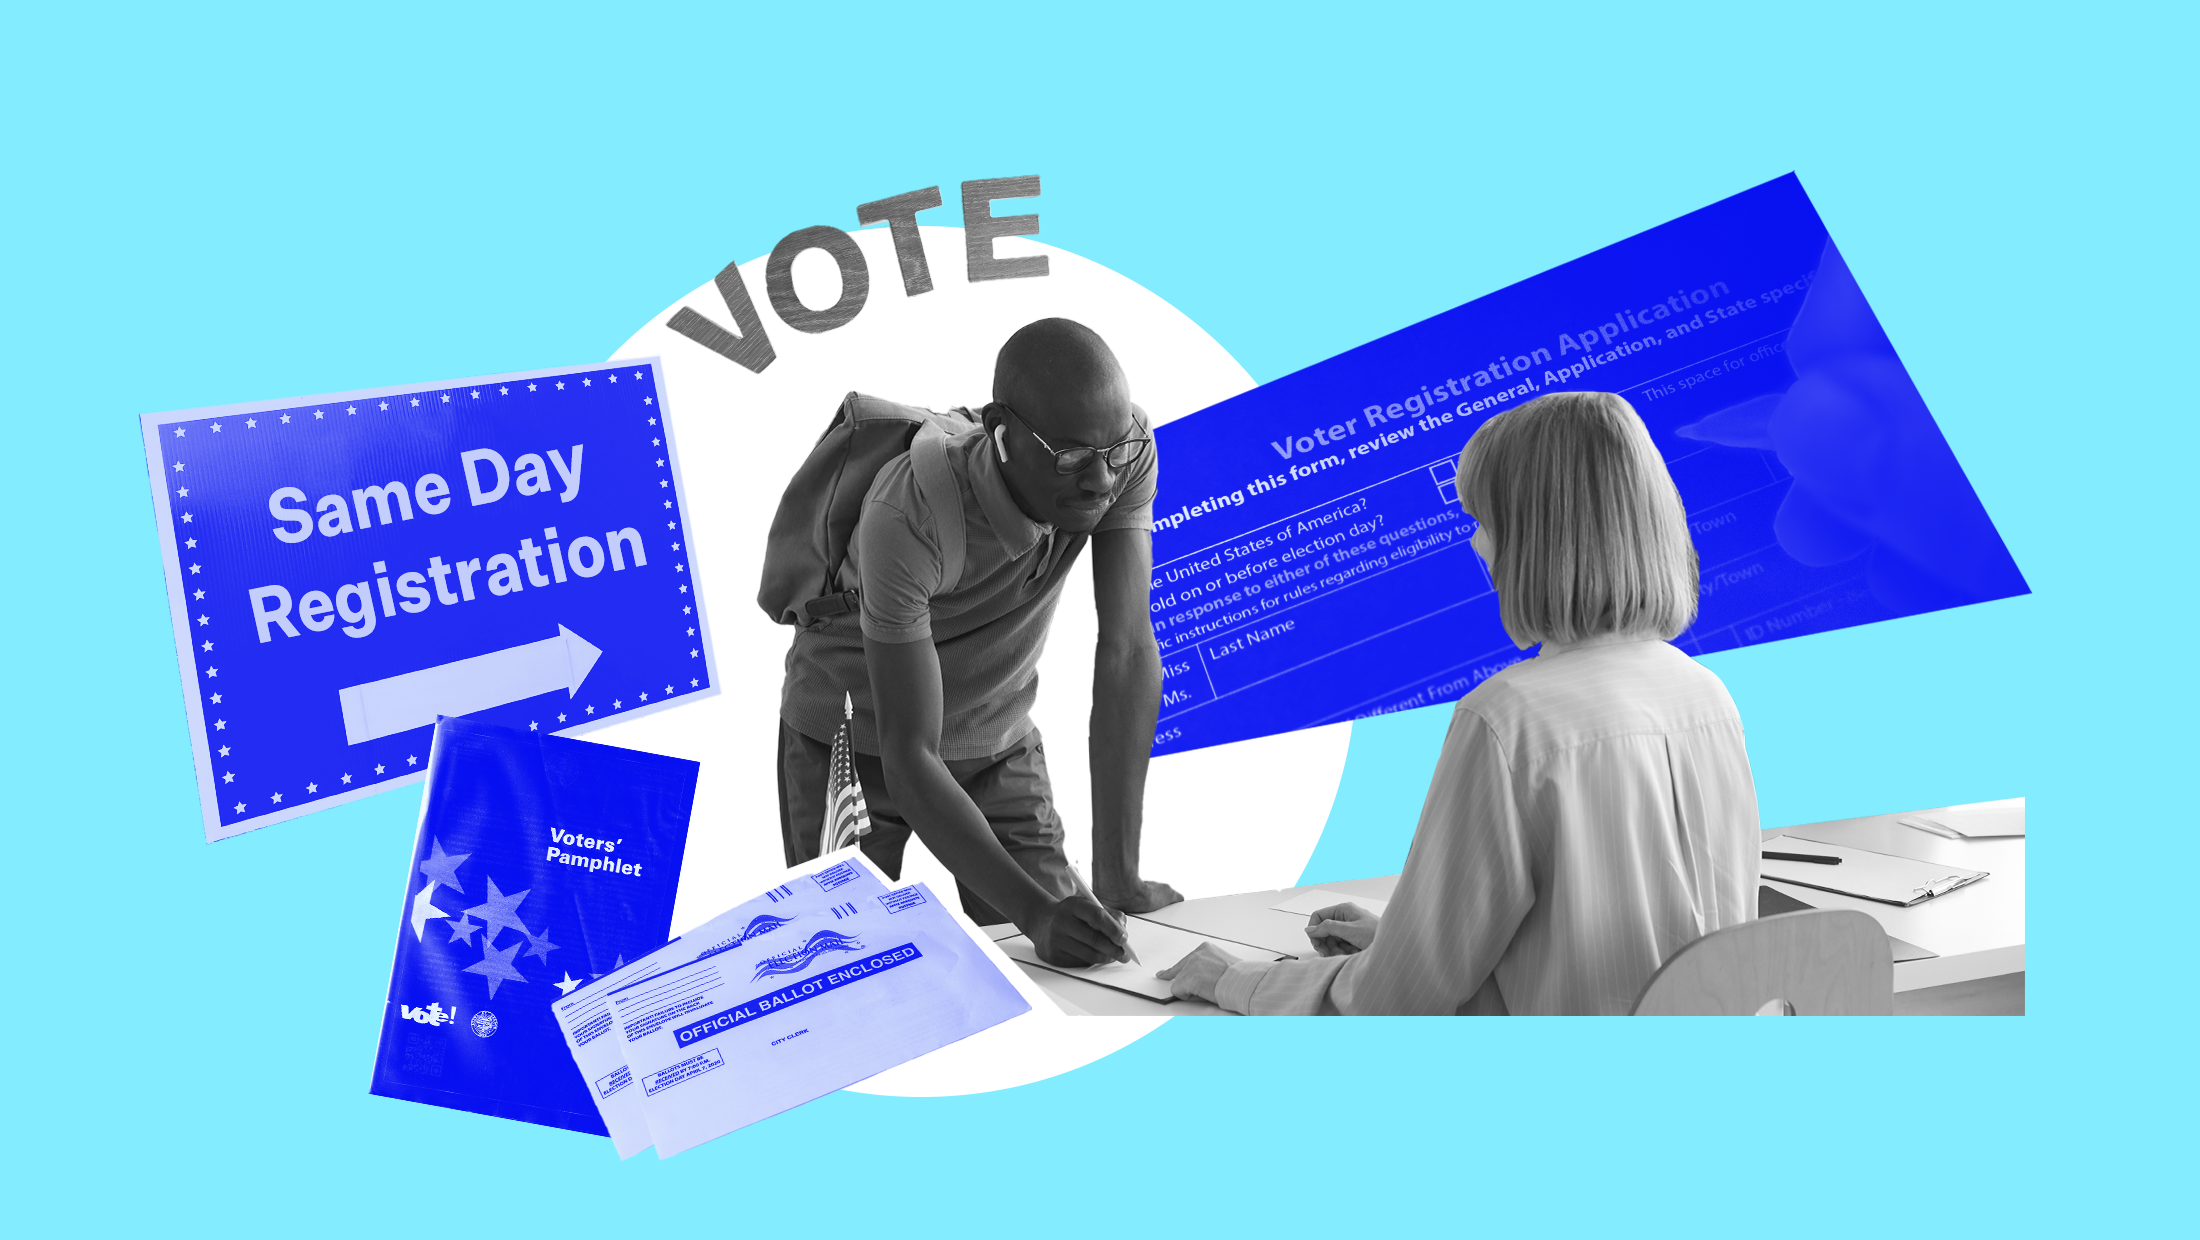 Man standing over a table signing a piece of paper that a woman (who is sitting on the other side of the table) is pointing at [both people are in black and white]. Layed out around the two people is a blue "same-day registration sign" with a blue arrow, a blue voter registration application, a blue voters' pamplet, and two white and blue ballot envelopes. There is also a "VOTE" sign above the man in dark grey. The background is light blue and there is also a white circle in the middle.